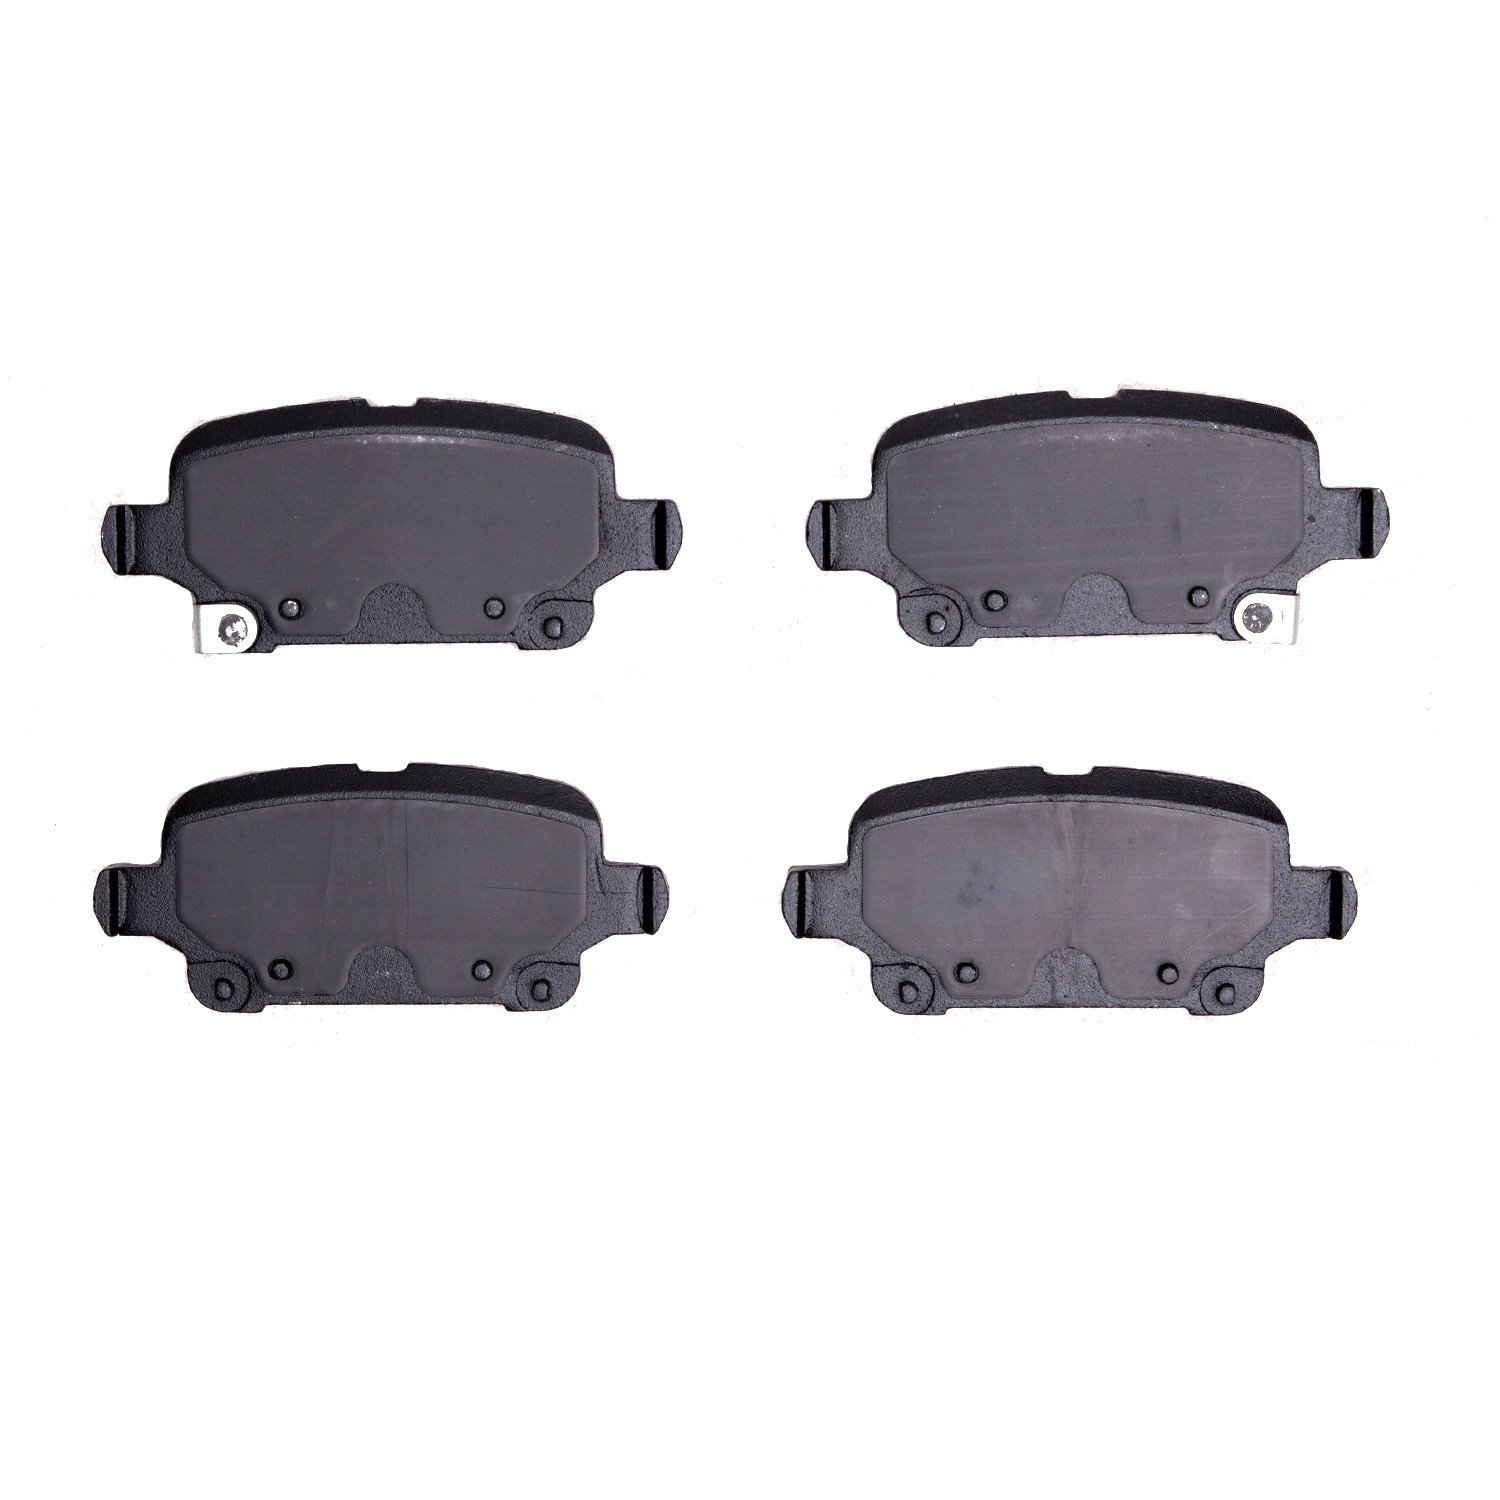 1310-1857-00 3000-Series Ceramic Brake Pads, Fits Select GM, Position: Rear